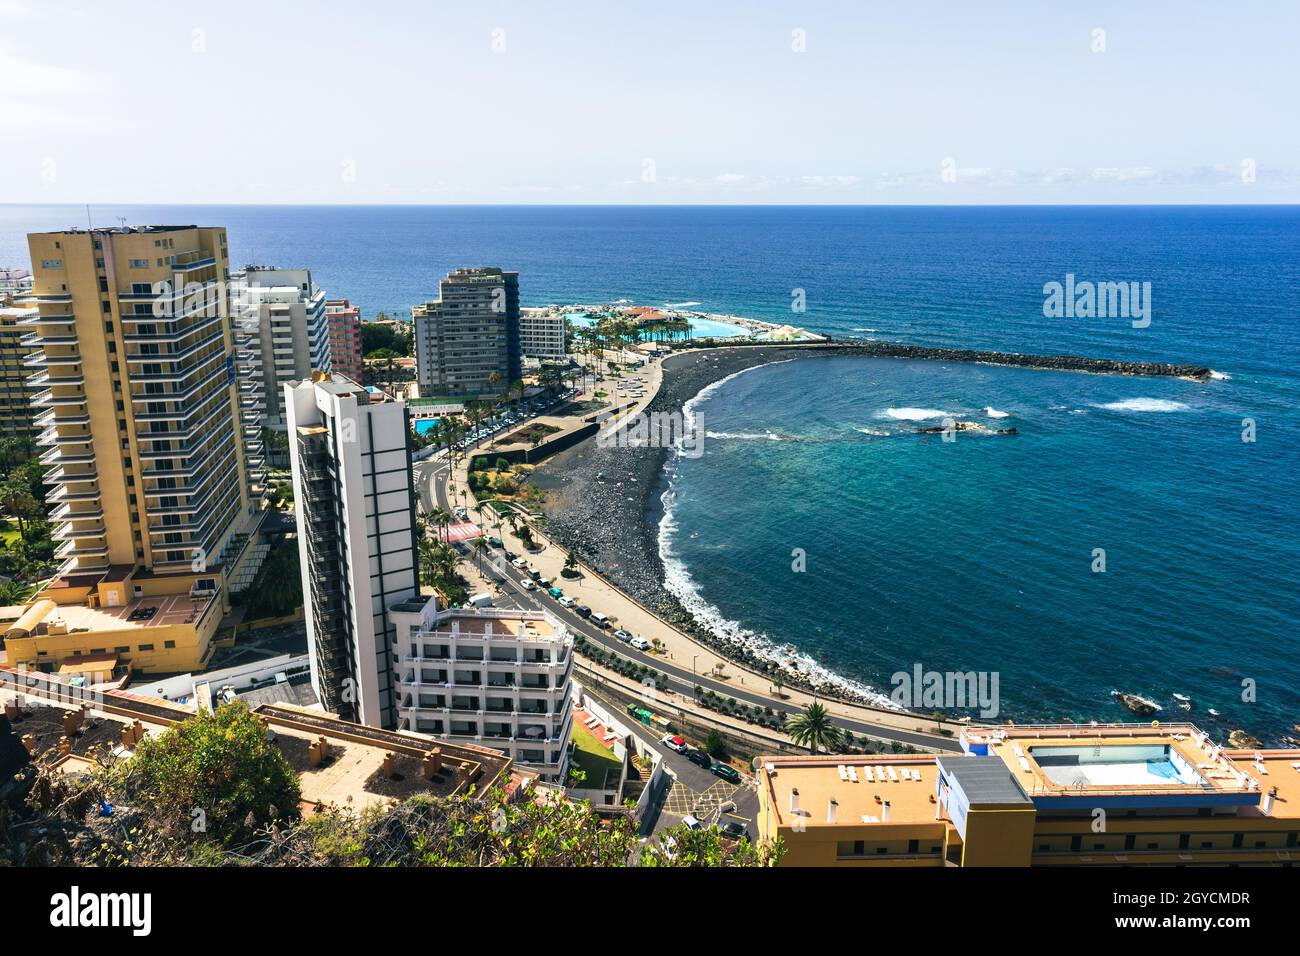 PUERTO DE LA CRUZ, CANARY ISLANDS, SPAIN - JULY 02, 2021: A view on the city from a height of observation deck: Mirador La Paz. Stock Photo